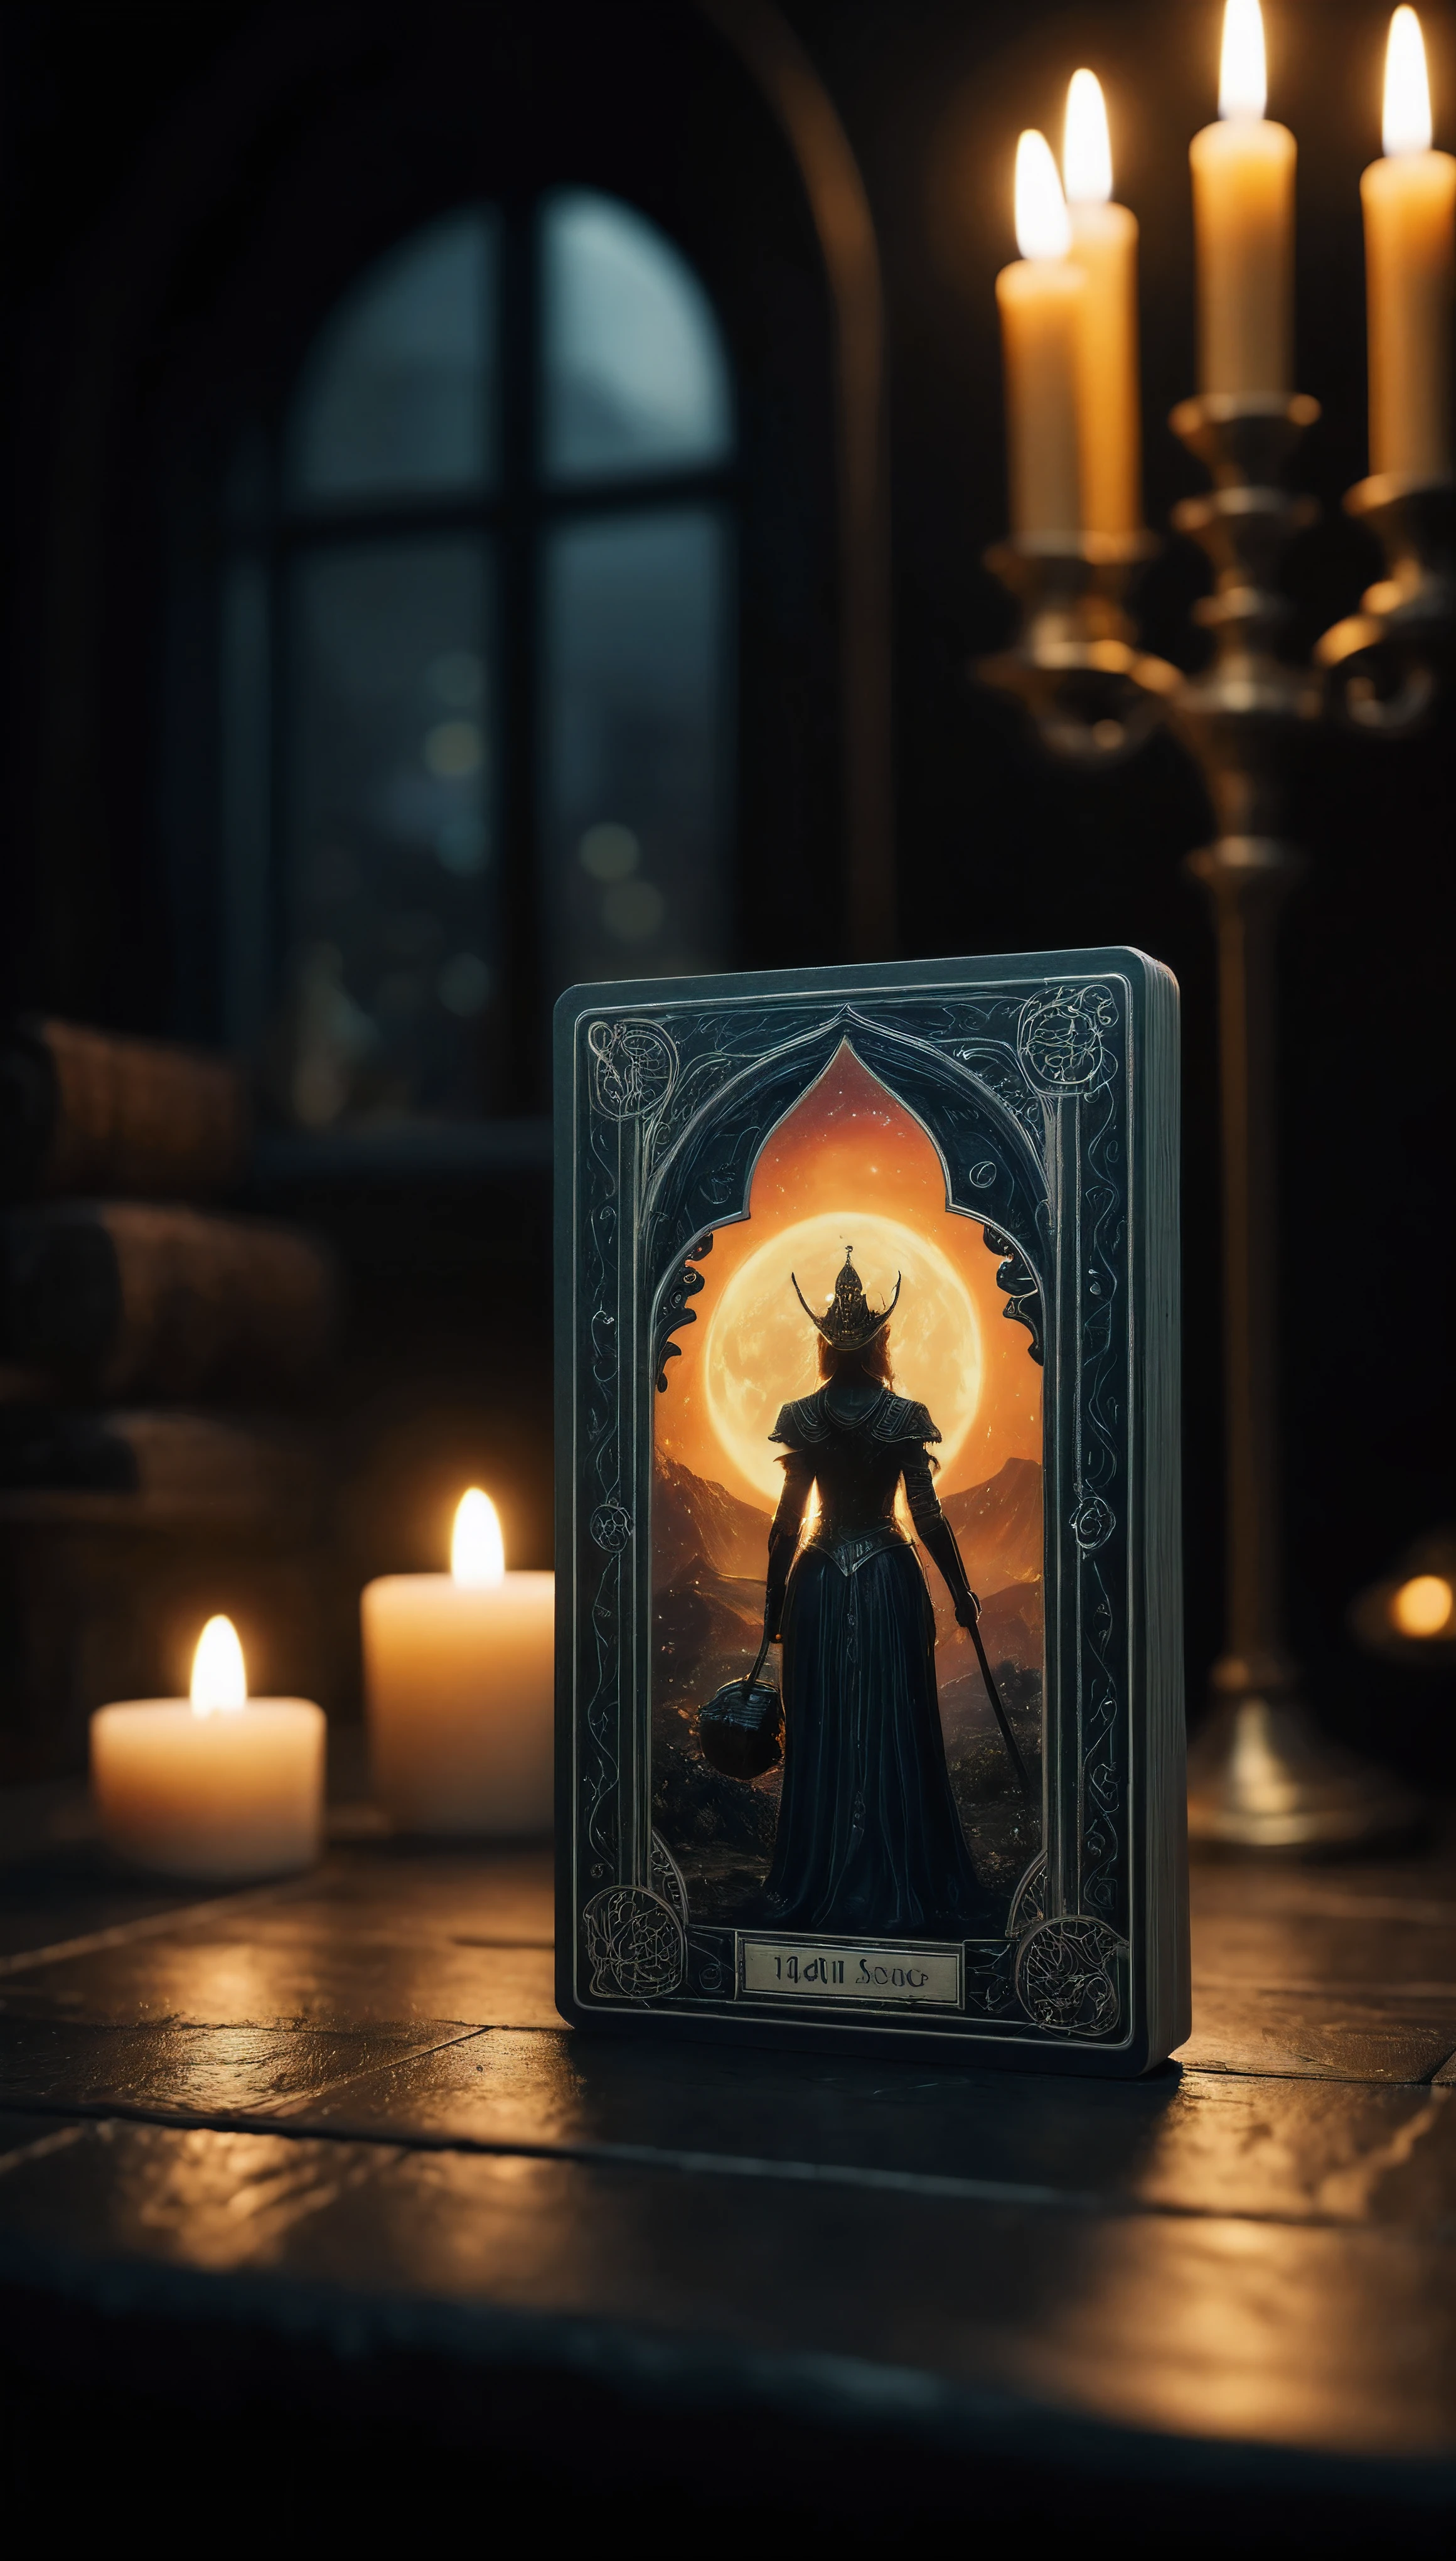 ((Masterpiece in maximum 16K resolution):1.6),((soft_color_photograpy:)1.5), ((Ultra-Detailed):1.4),((Movie-like still images and dynamic angles):1.3). | (Macro shot cinematic photo of Tarot Cards), ((Tarot cards):1.2), (Tarot table), (focus on tarot cards), (macro lens), (exotic antiques), (Dark Candles), (luminous object), (Mysterious atmosphere), (shimmer), (aesthetic DnD vase), (visual experience),(Realism), (Realistic),award-winning graphics, dark shot, film grain, extremely detailed, Digital Art, rtx, Unreal Engine, scene concept anti glare effect, All captured with sharp focus. | Rendered in ultra-high definition with UHD and retina quality, this masterpiece ensures anatomical correctness and textured skin with super detail. With a focus on high quality and accuracy, this award-winning portrayal captures every nuance in stunning 16k resolution, immersing viewers in its lifelike depiction. | ((perfect_composition, perfect_design, perfect_layout, perfect_detail, ultra_detailed)), ((enhance_all, fix_everything)), More Detail, Enhance.